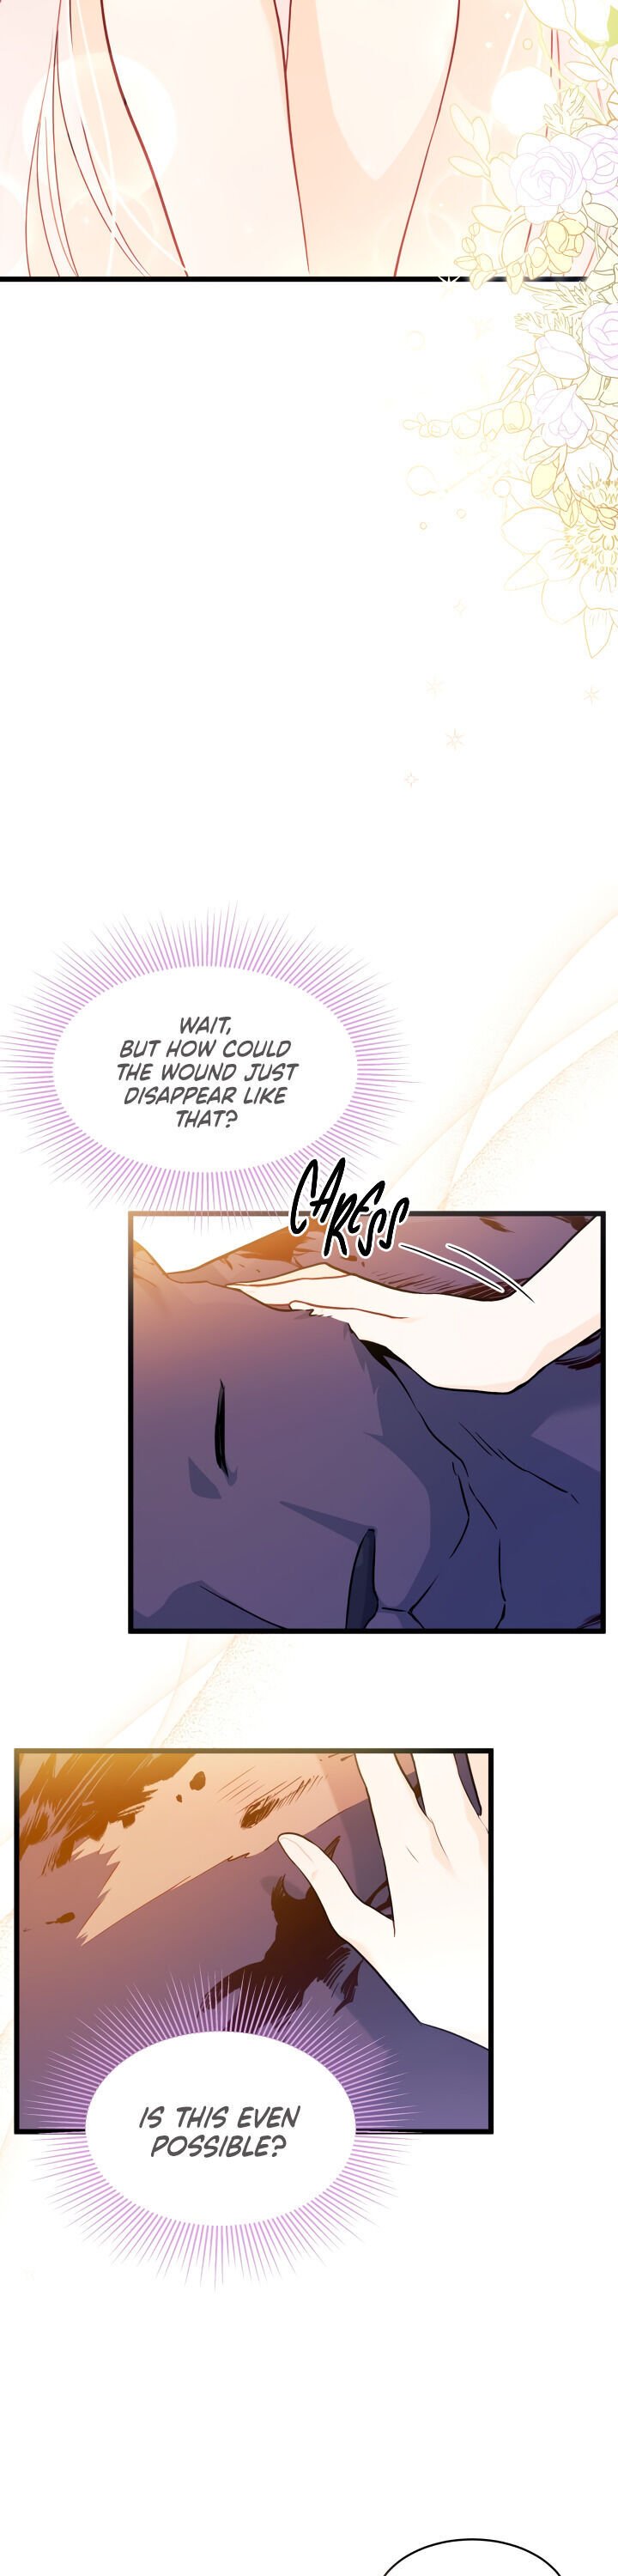 the-symbiotic-relationship-between-a-rabbit-and-a-black-panther-chap-30-19